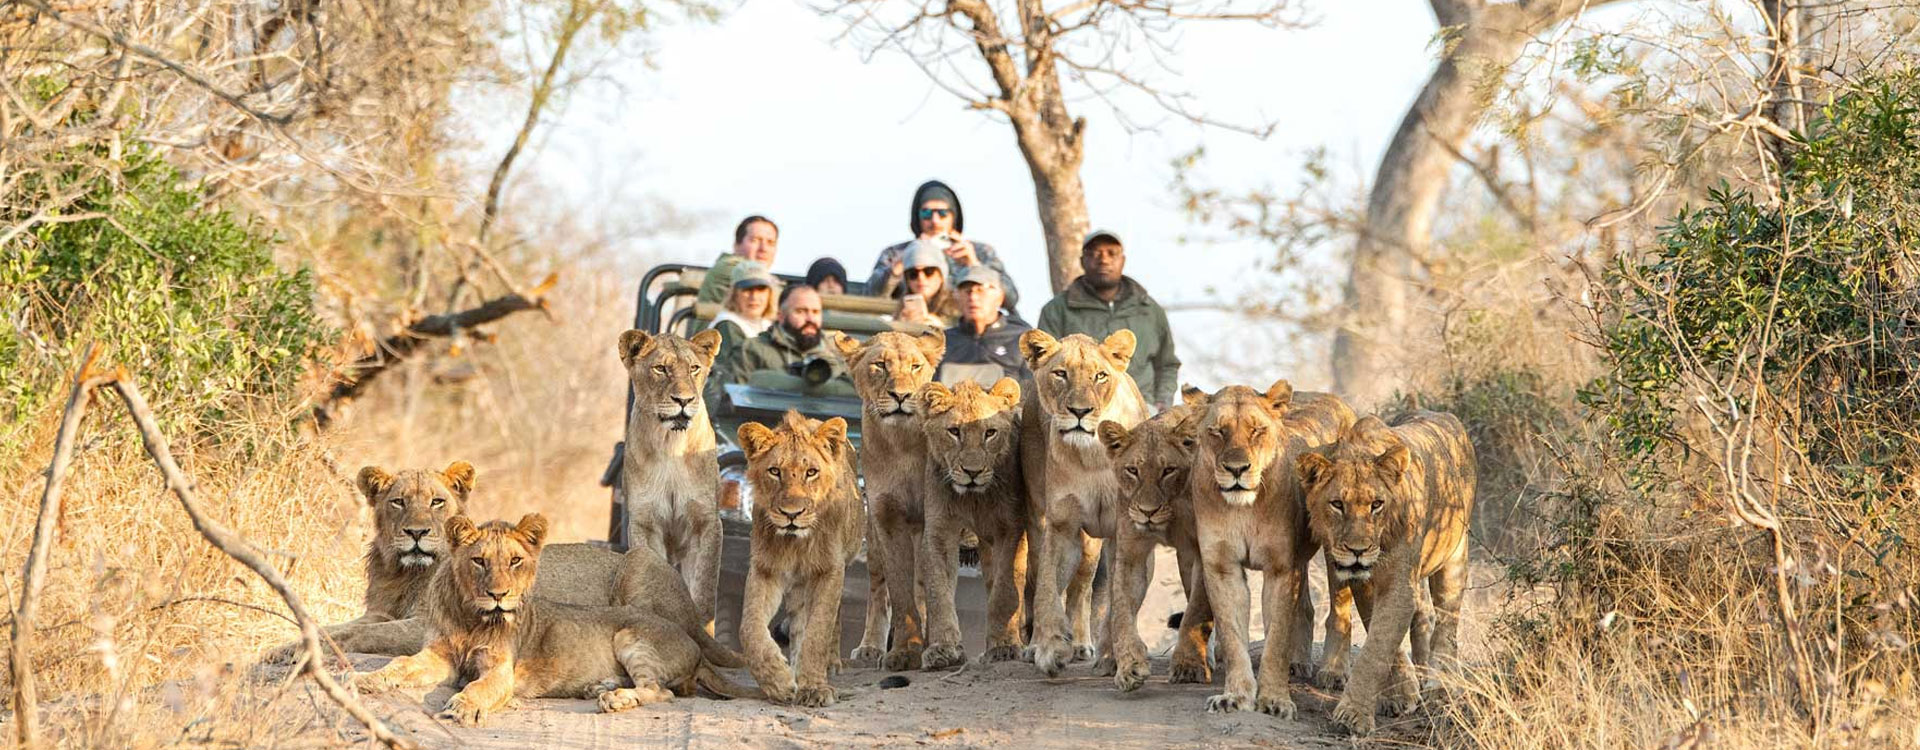 5 Days 4 Nights The Greater Kruger Adventure